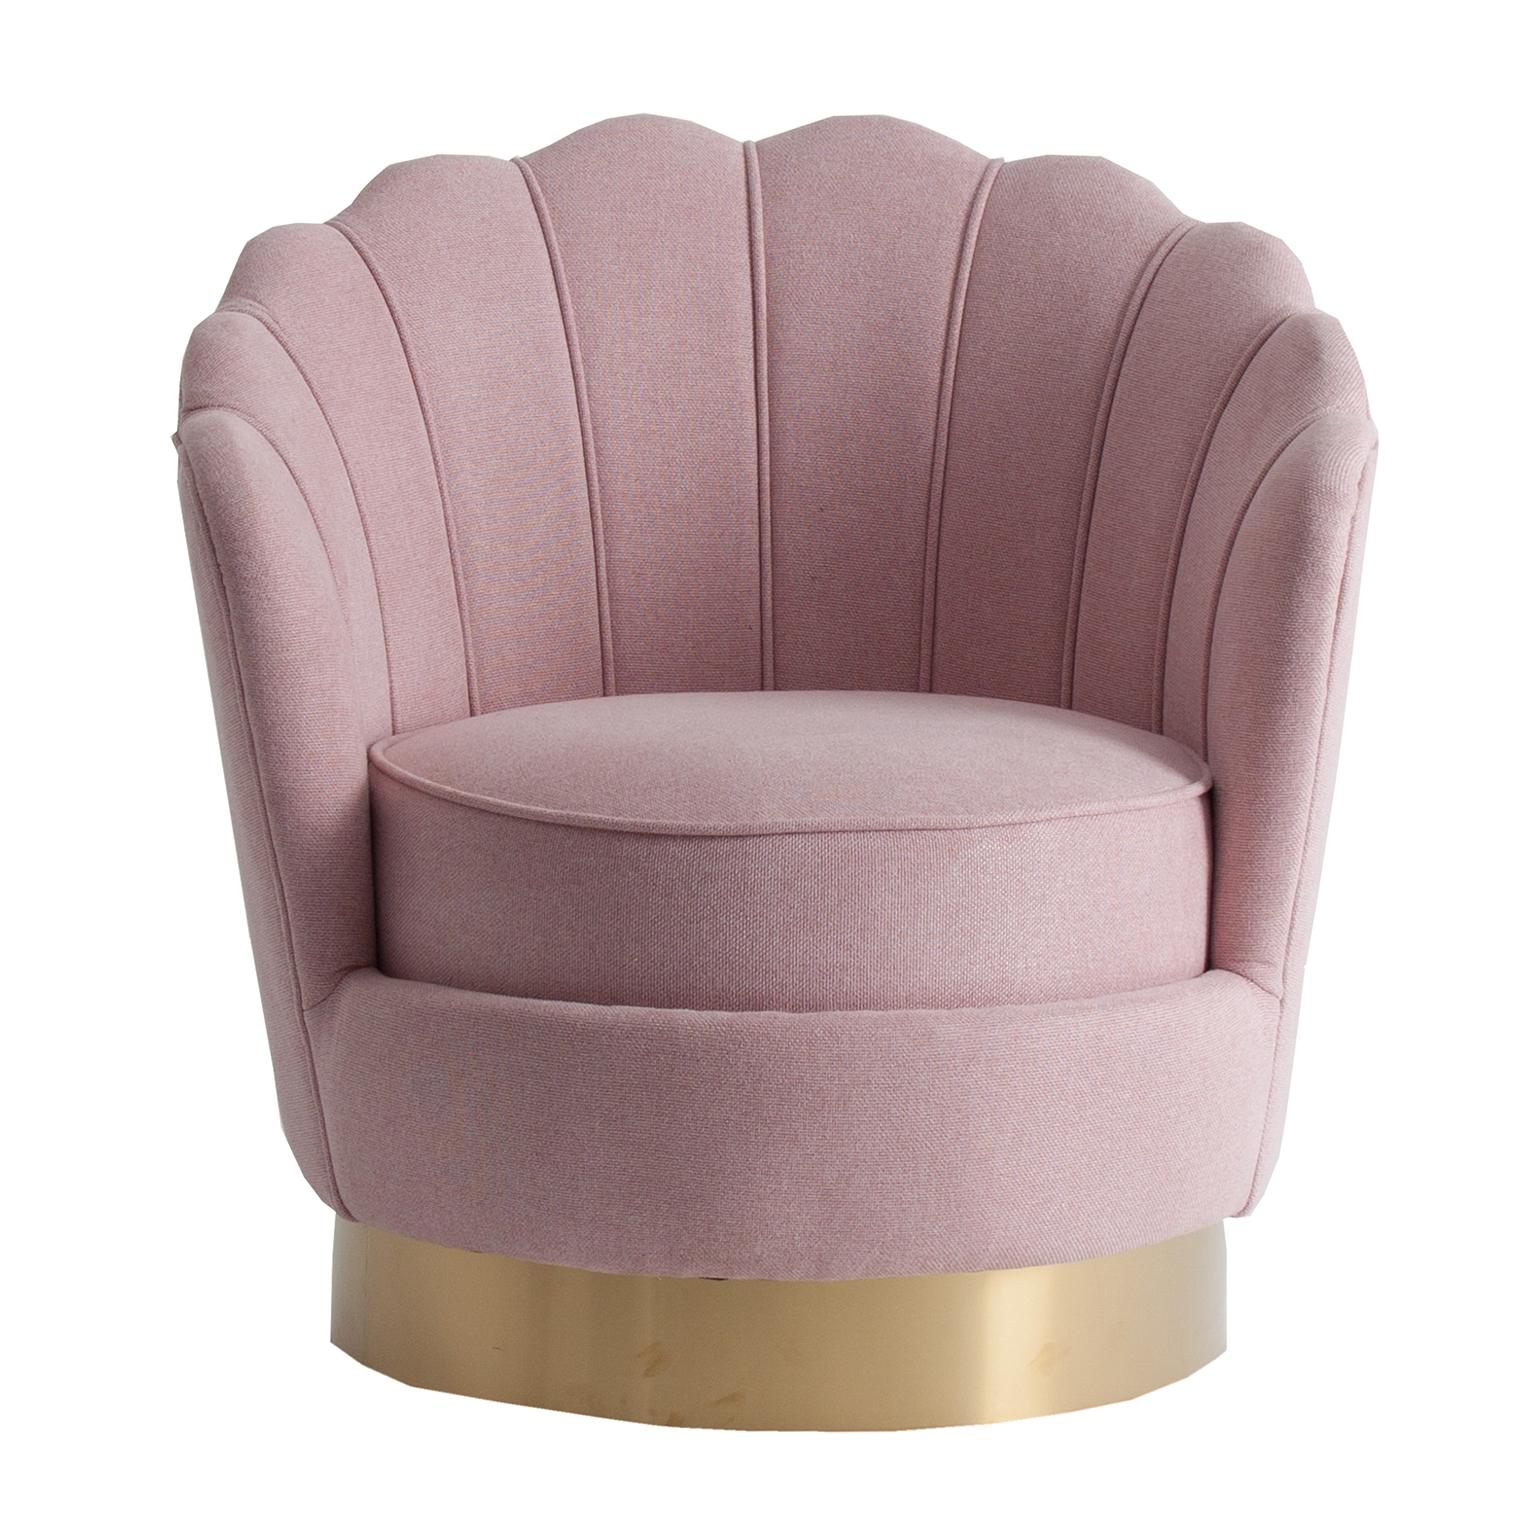 Golden round foot and powdery pink fabric and lounge comfy armchair in Art Deco style.